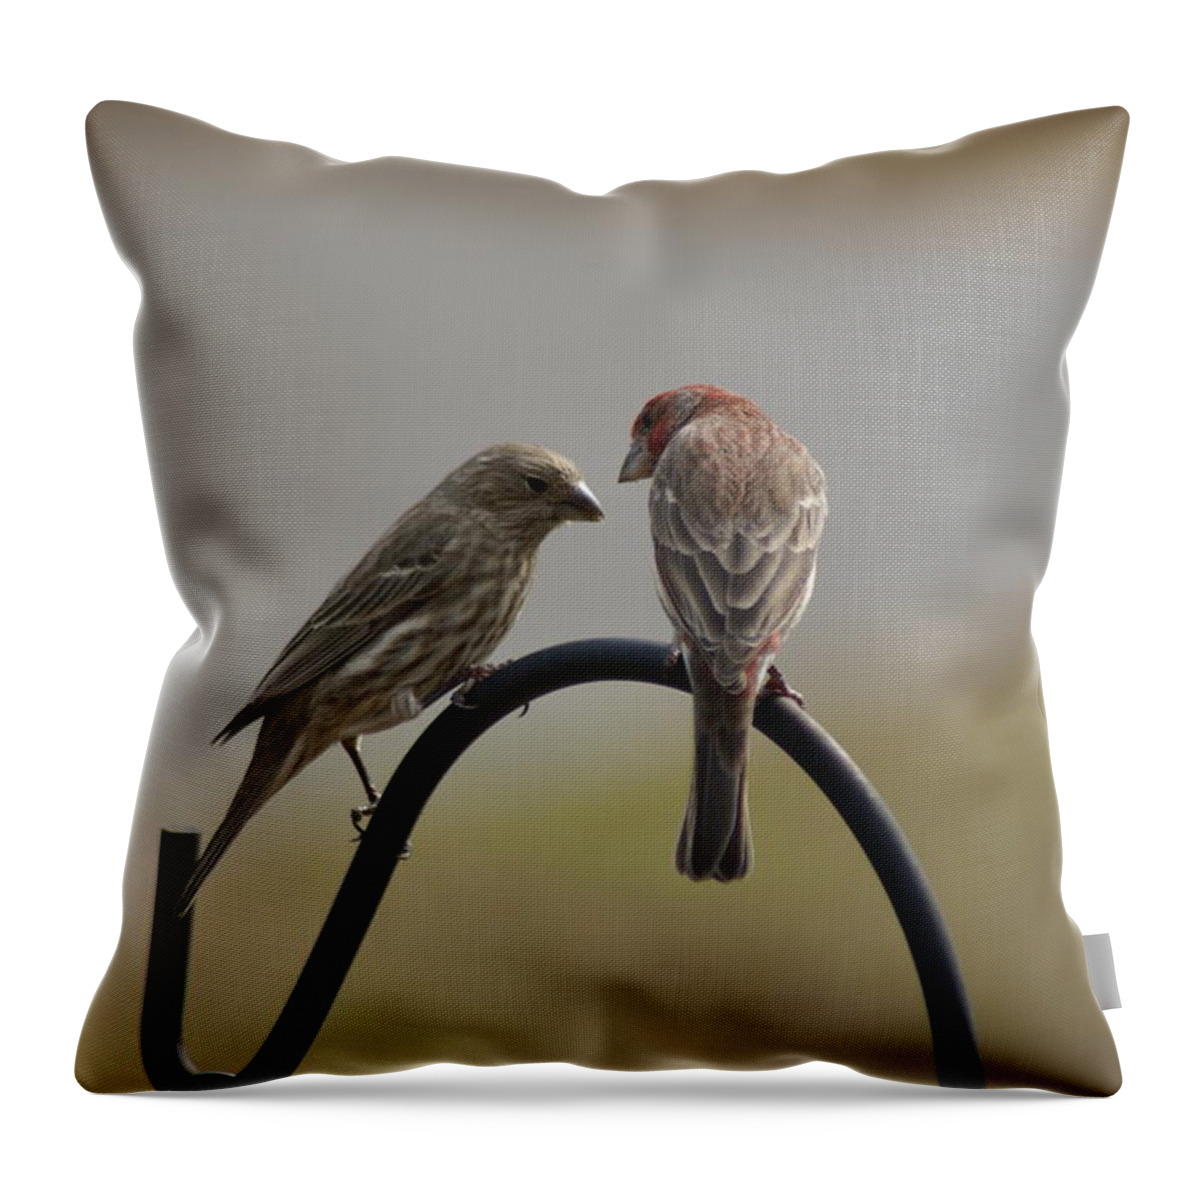  Throw Pillow featuring the photograph House Finch Pair by Heather E Harman